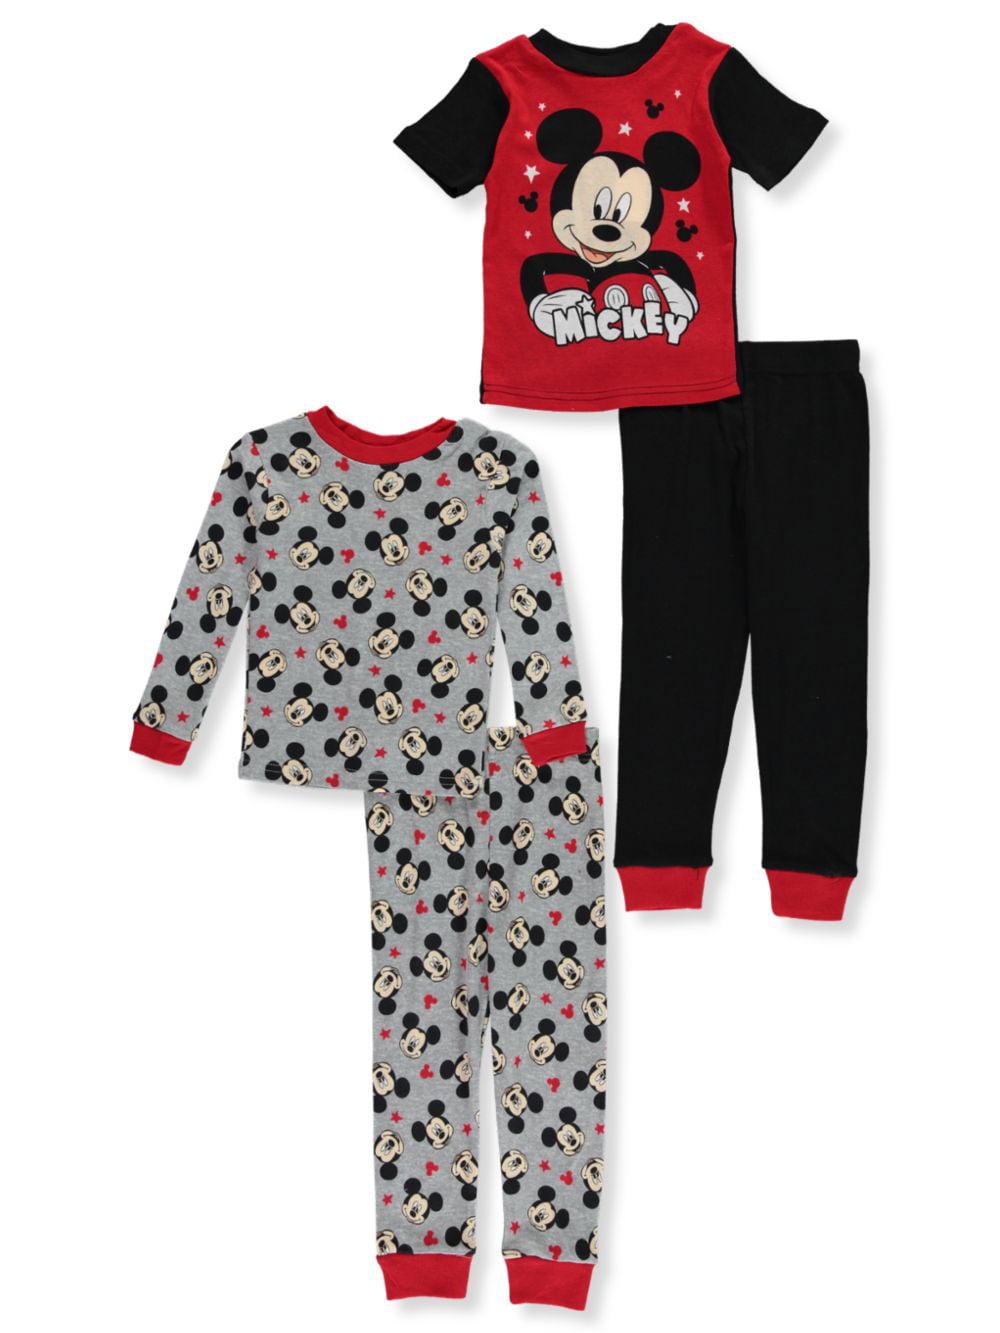 NEW TODDLER BOYS MICKEY MOUSE ROADSTER RACERS 2 PIECE PAJAMA SET SIZE 2T PJS 